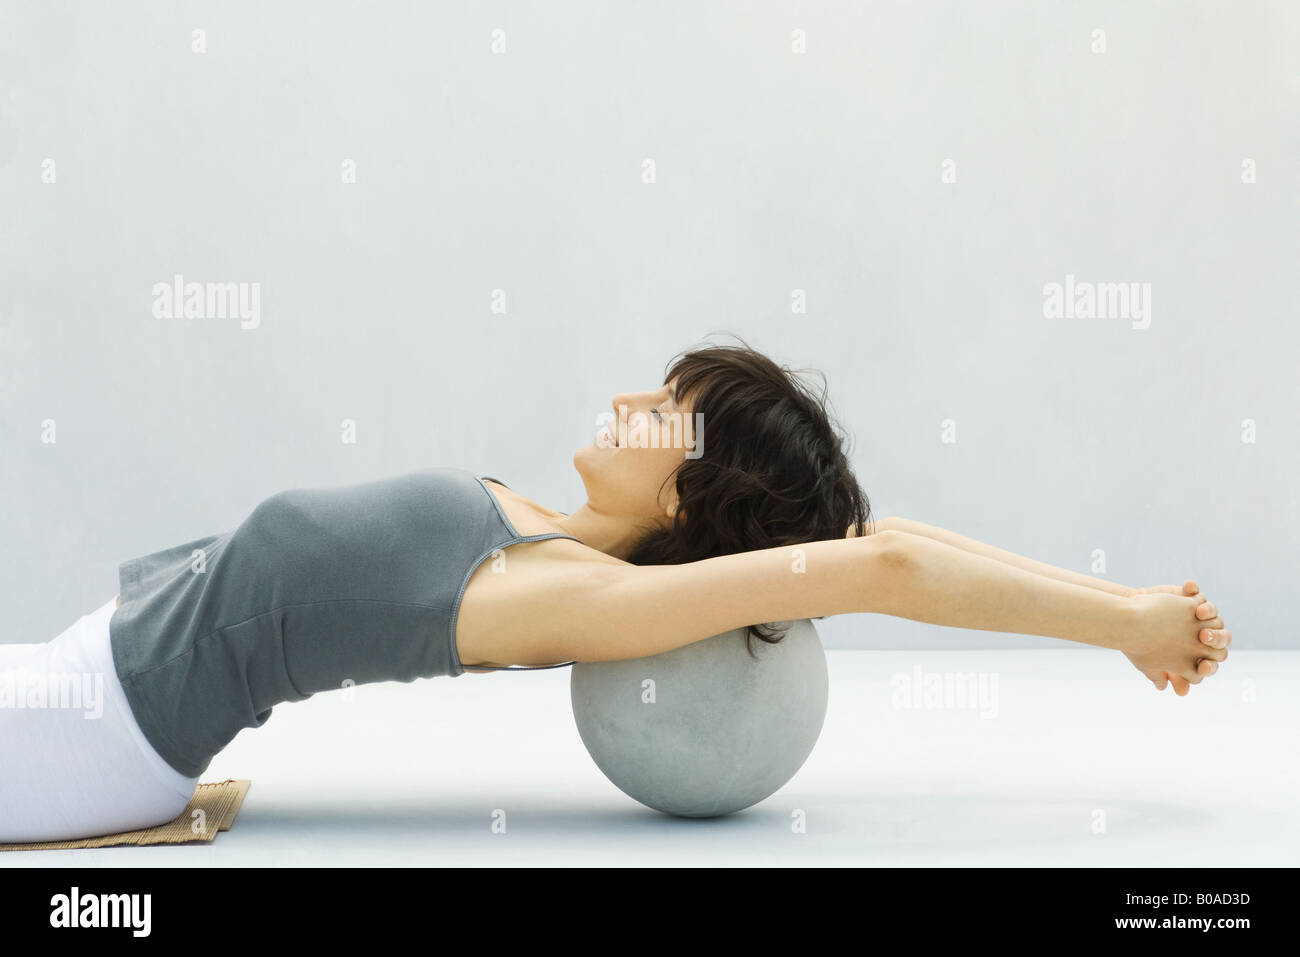 Woman leaning back against fitness ball, arms outstretched, side view Stock Photo